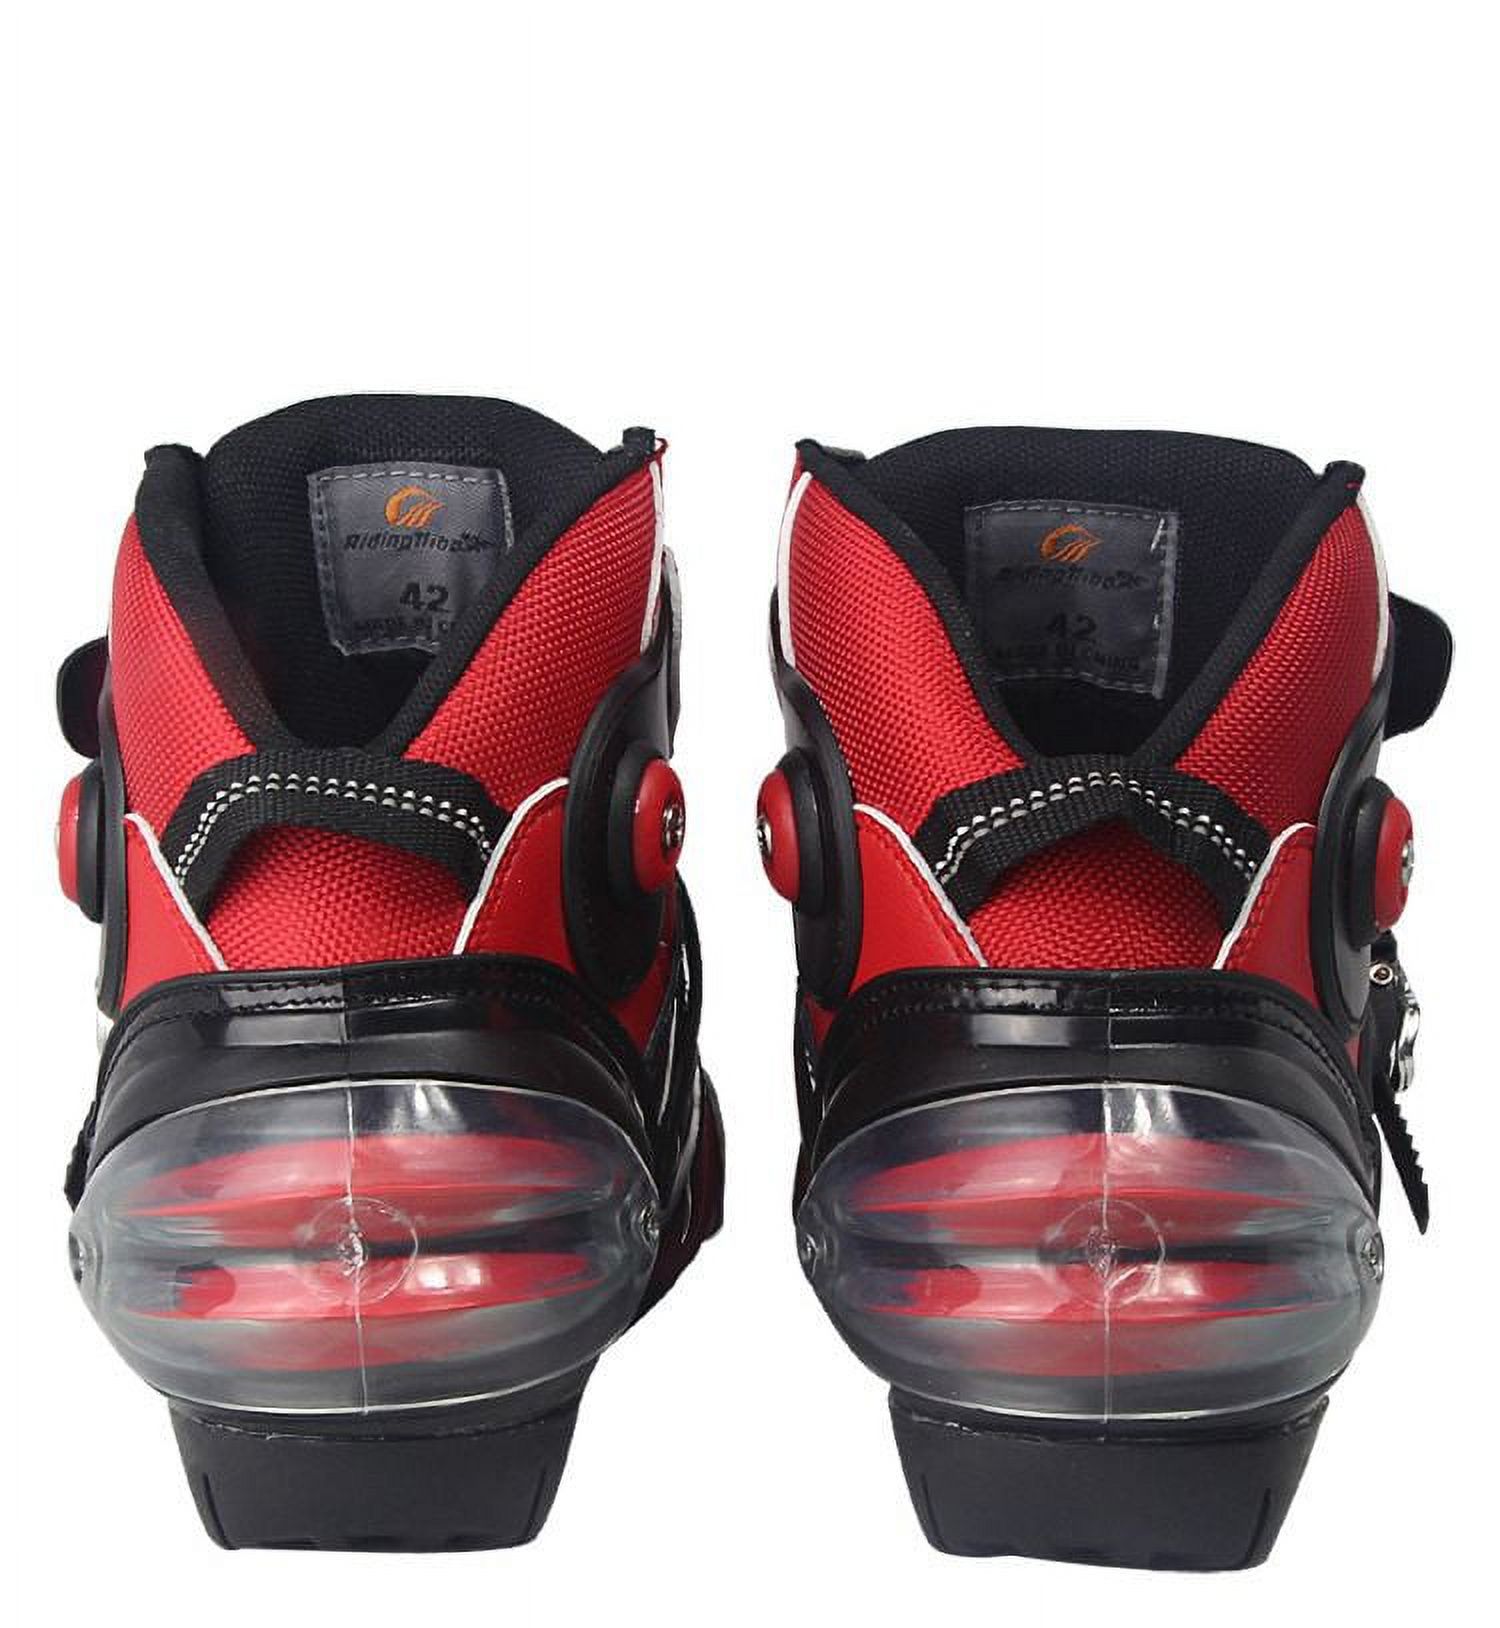 Men Soft Motorcycle Boots Biker Waterproof Speed Motocross Boots Non-slip Motorcycle Shoes Color:red Shoe US Size:9.5 - image 2 of 8